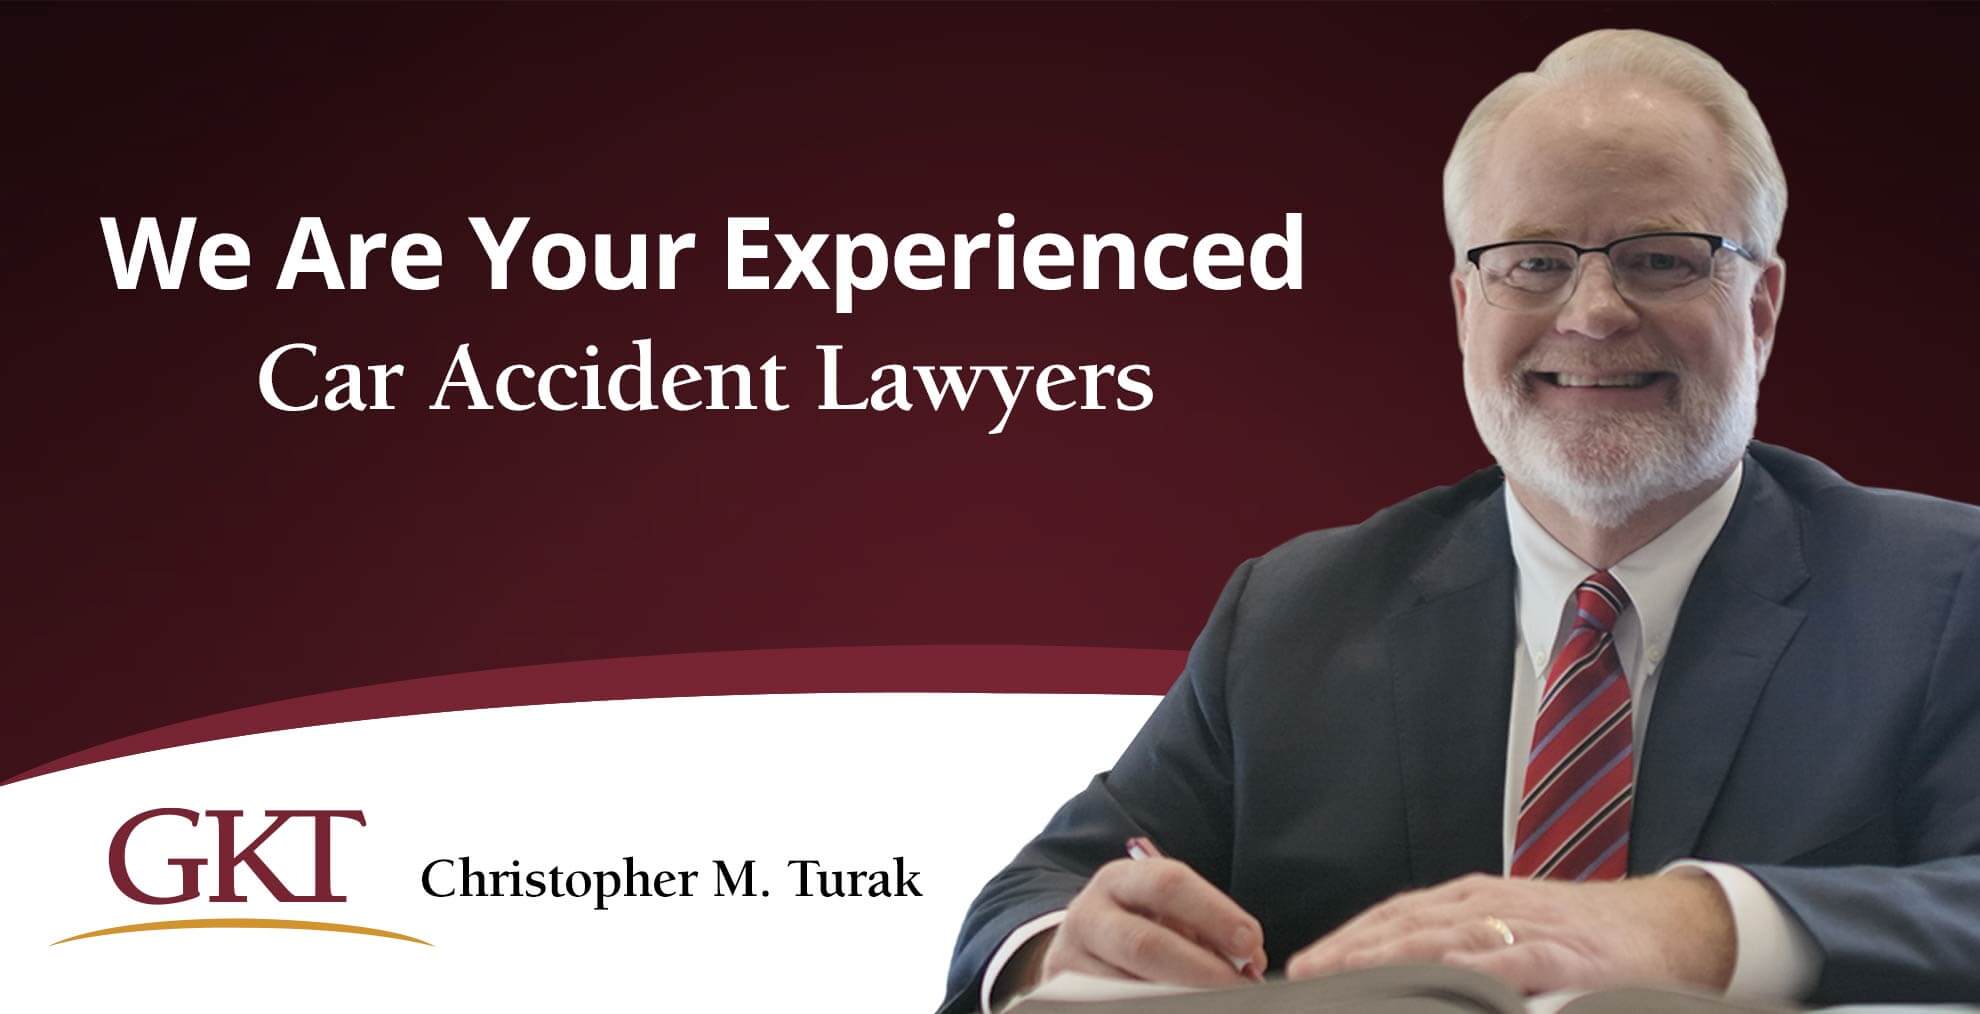 We Are Your Experienced Car Accident Lawyers - Christopher M. Turak - GKT